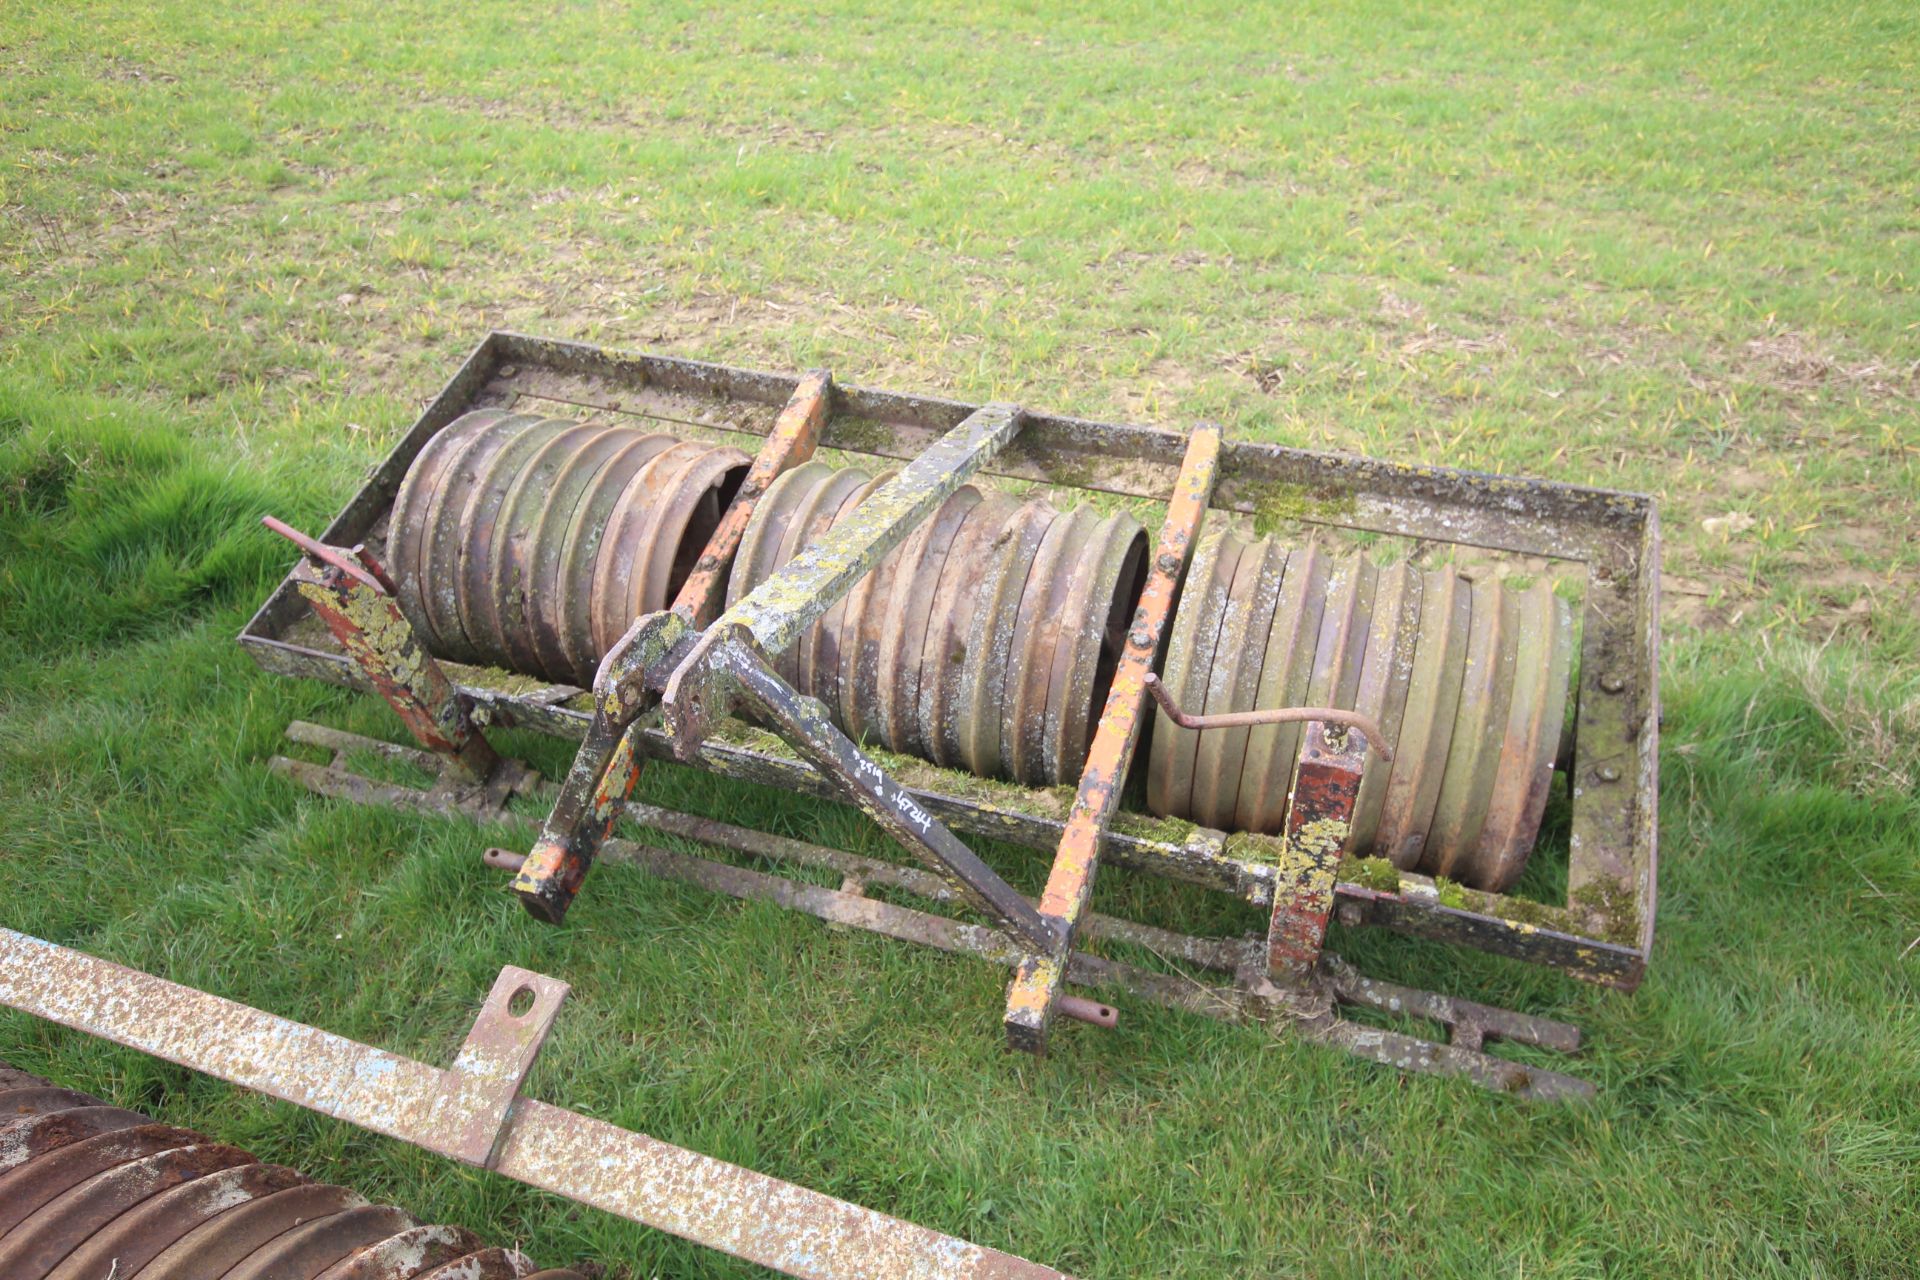 Linkage mounted Cambridge roll. For sale due to retirement. V